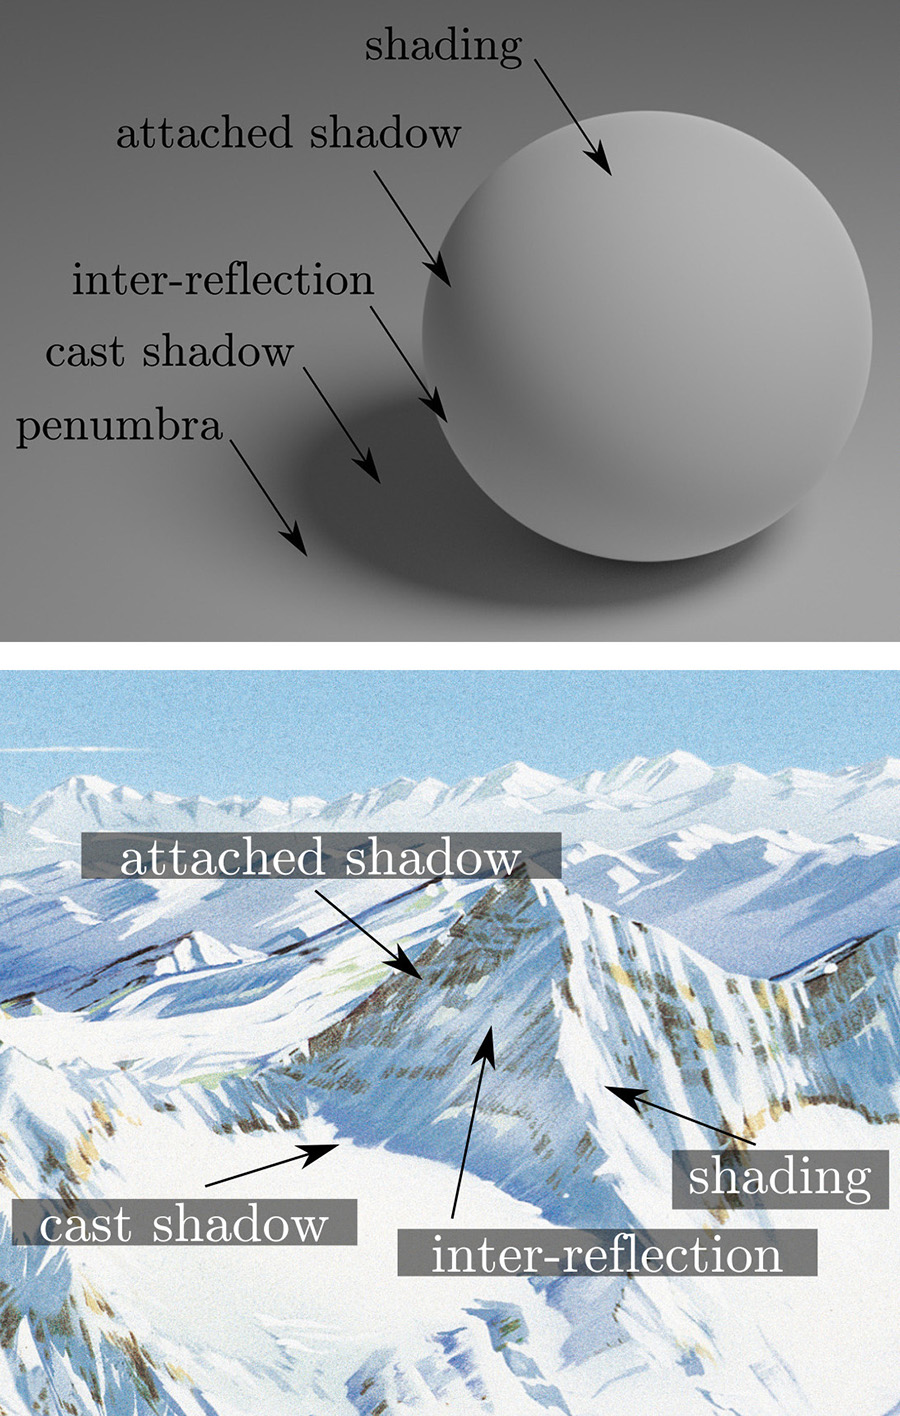 Figure 12. Lighting terminology as defined by Mamassian, Knill, and Kersten (1998). Top: A rendering of a diffuse sphere. Bottom: The terminology applied to a close-up of Grandes Rousses, Arthur & Pierre Novat 2011. Note that a penumbra does not occur with strong directional lights, e.g., the sun, hence its absence in Novat’s panoramas.